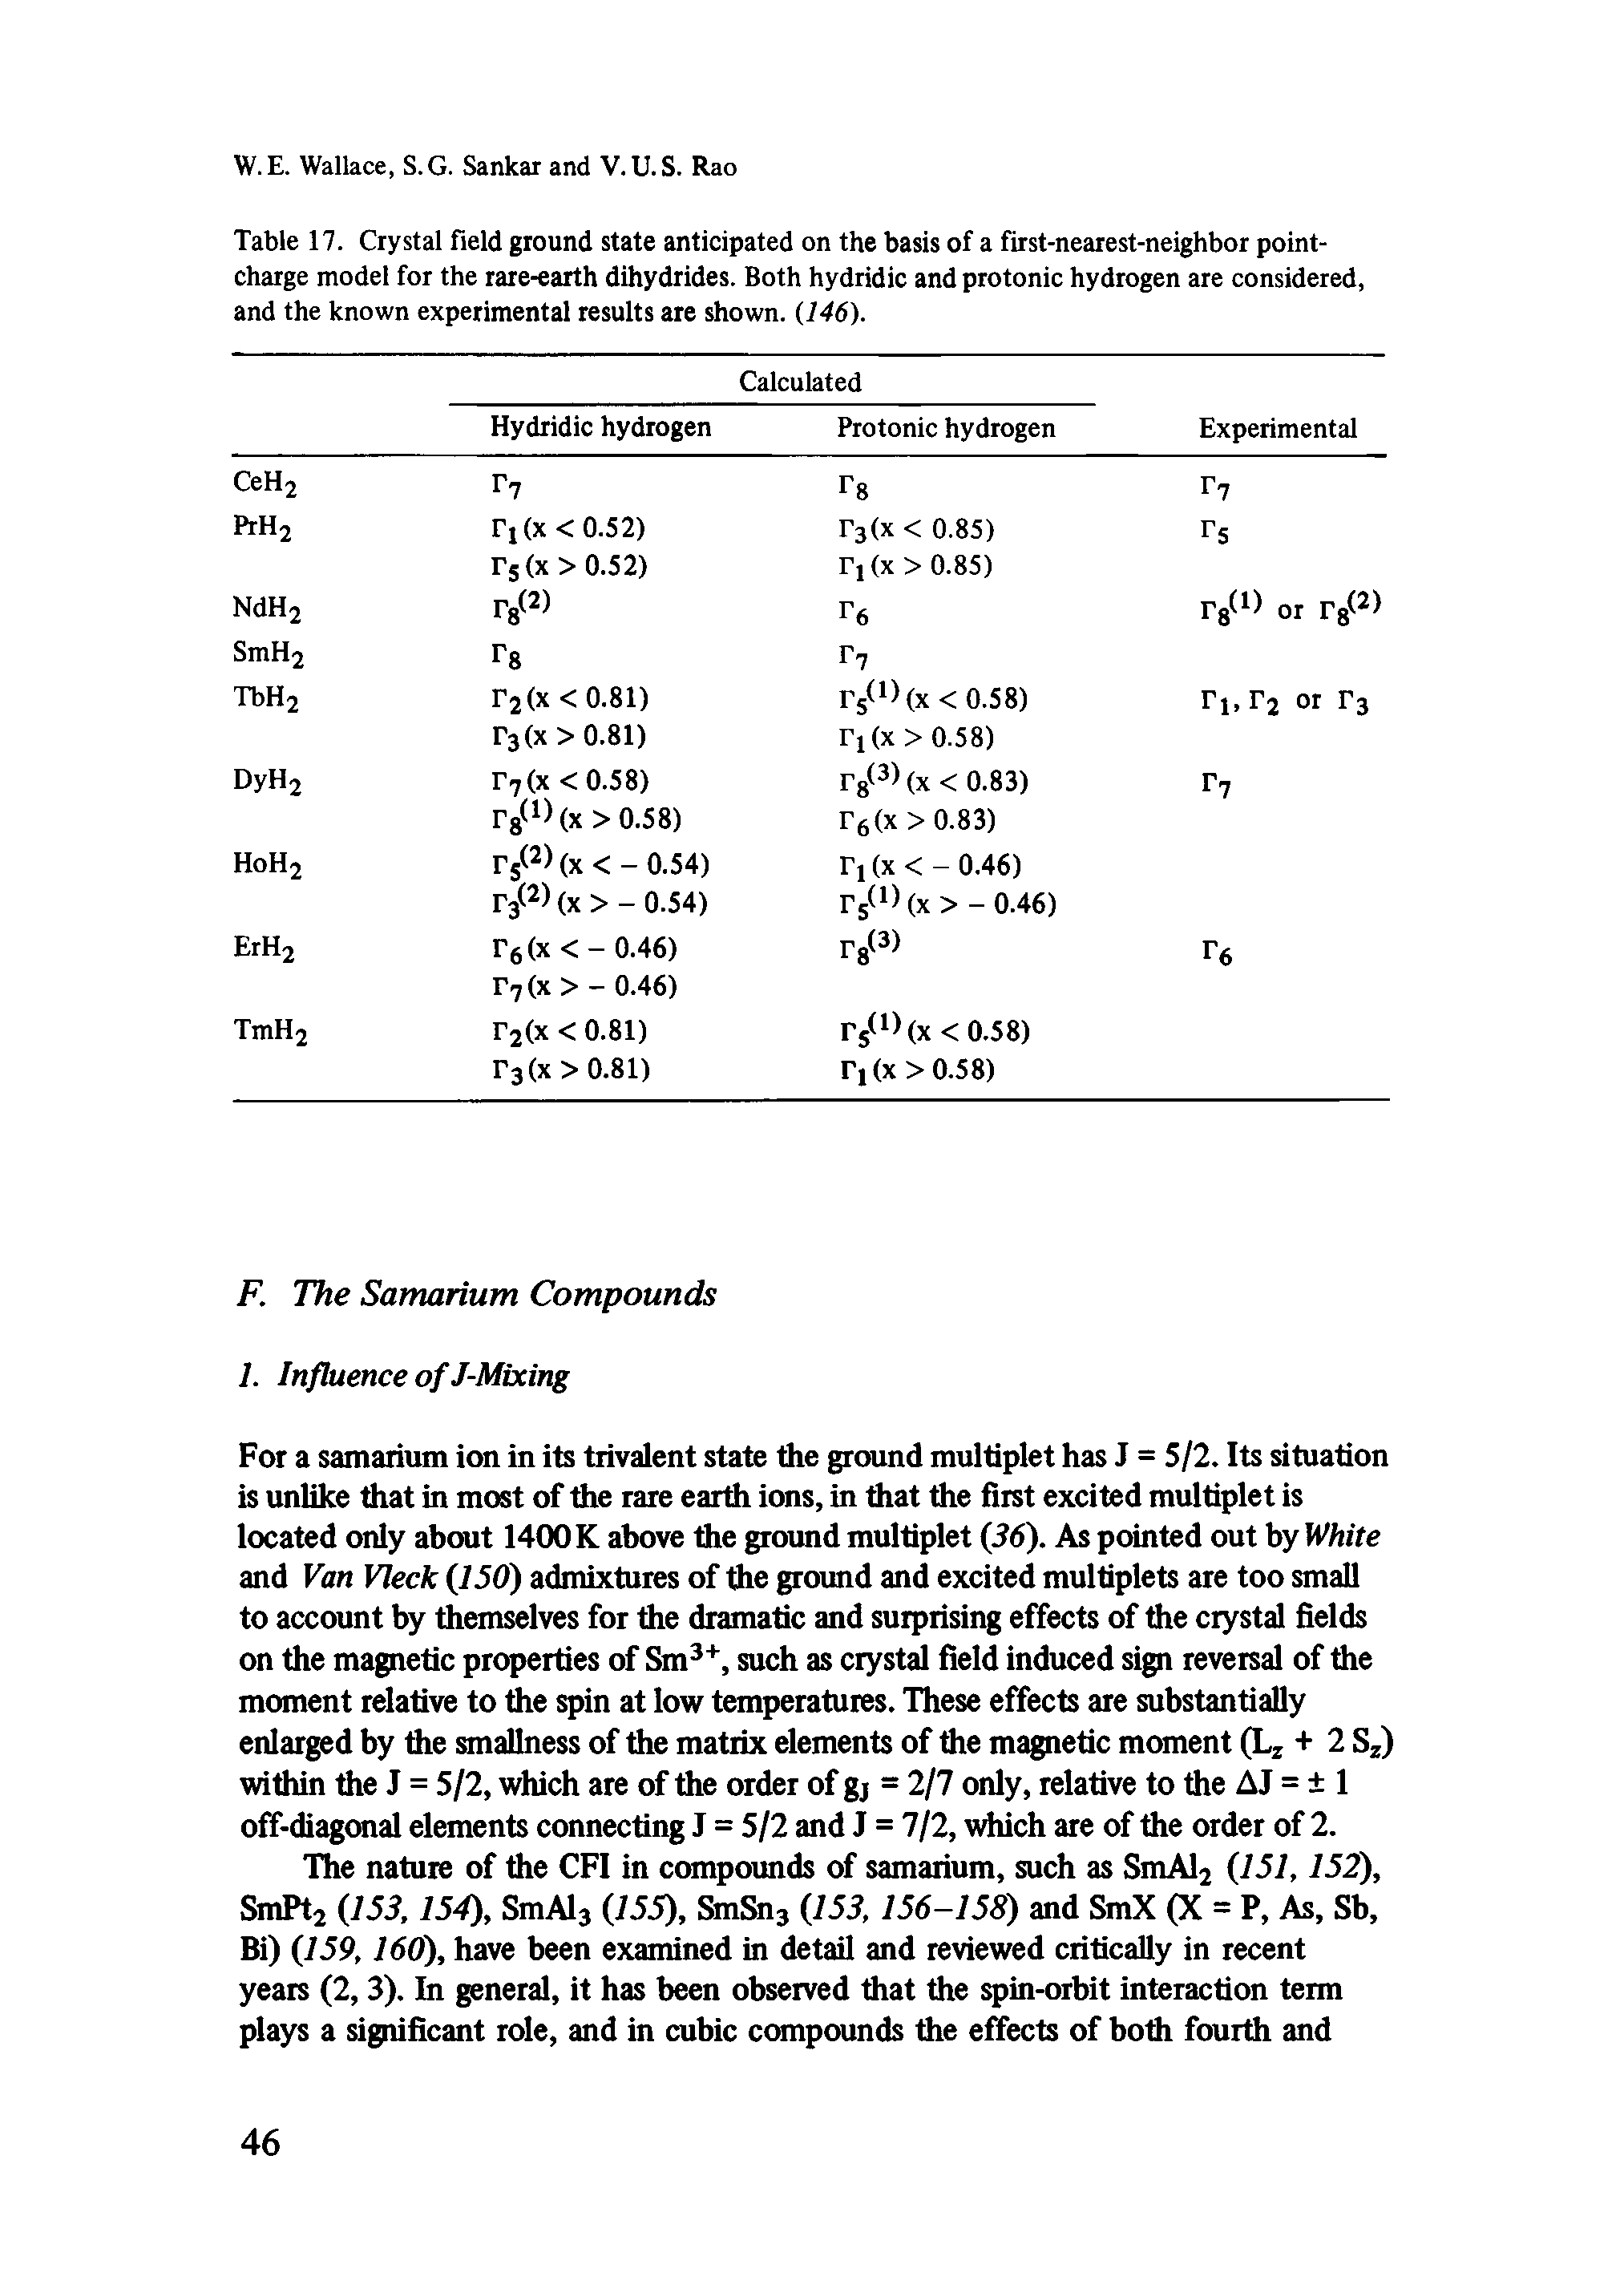 Table 17. Crystal field ground state anticipated on the basis of a first-nearest-neighbor point-charge model for the rare-earth dihydrides. Both hydridic and protonic hydrogen are considered, and the known experimental results are shown. (146).